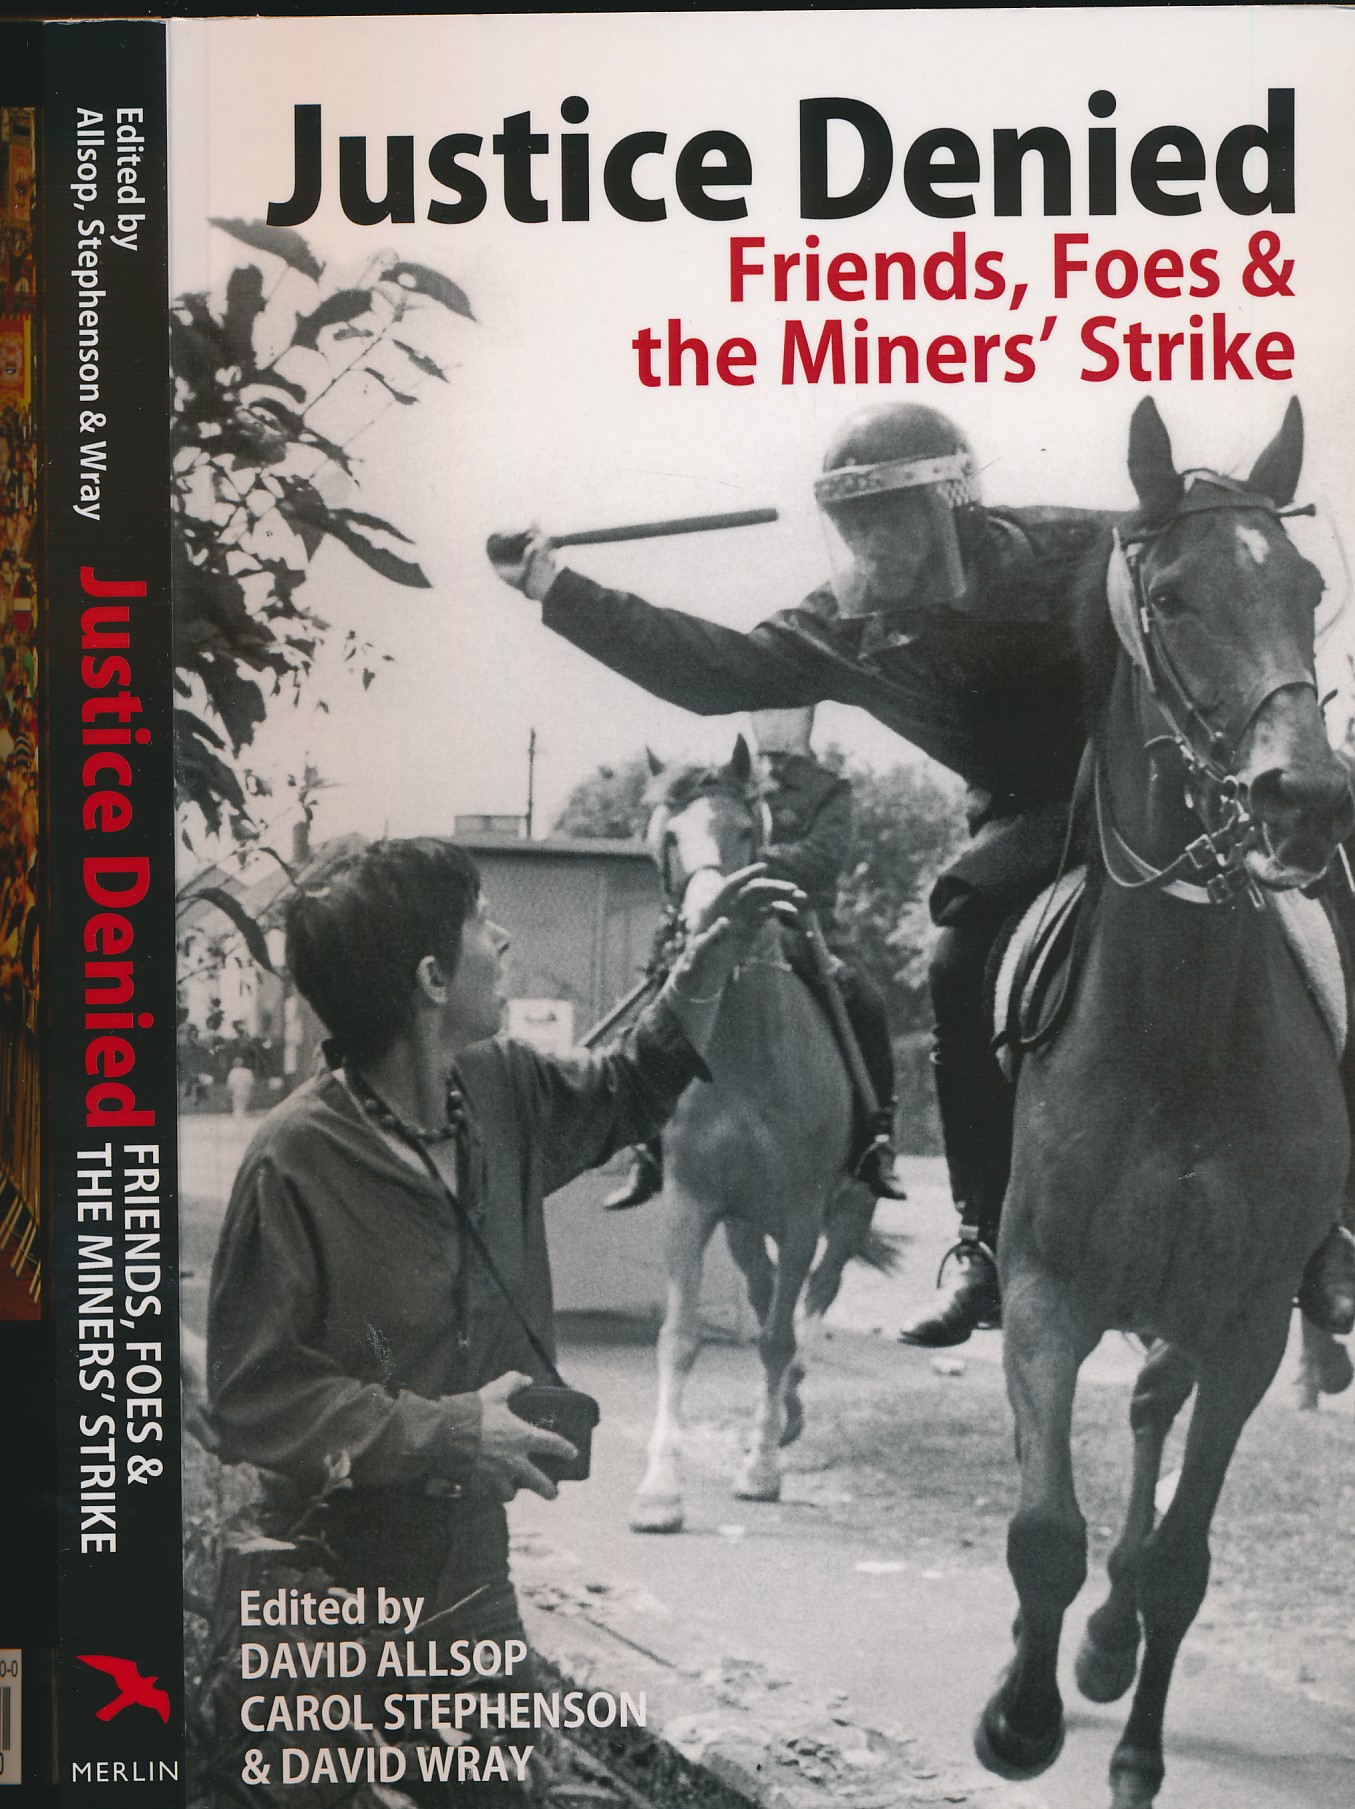 Justice Denied. Friends, Foes & the Miners' Strike